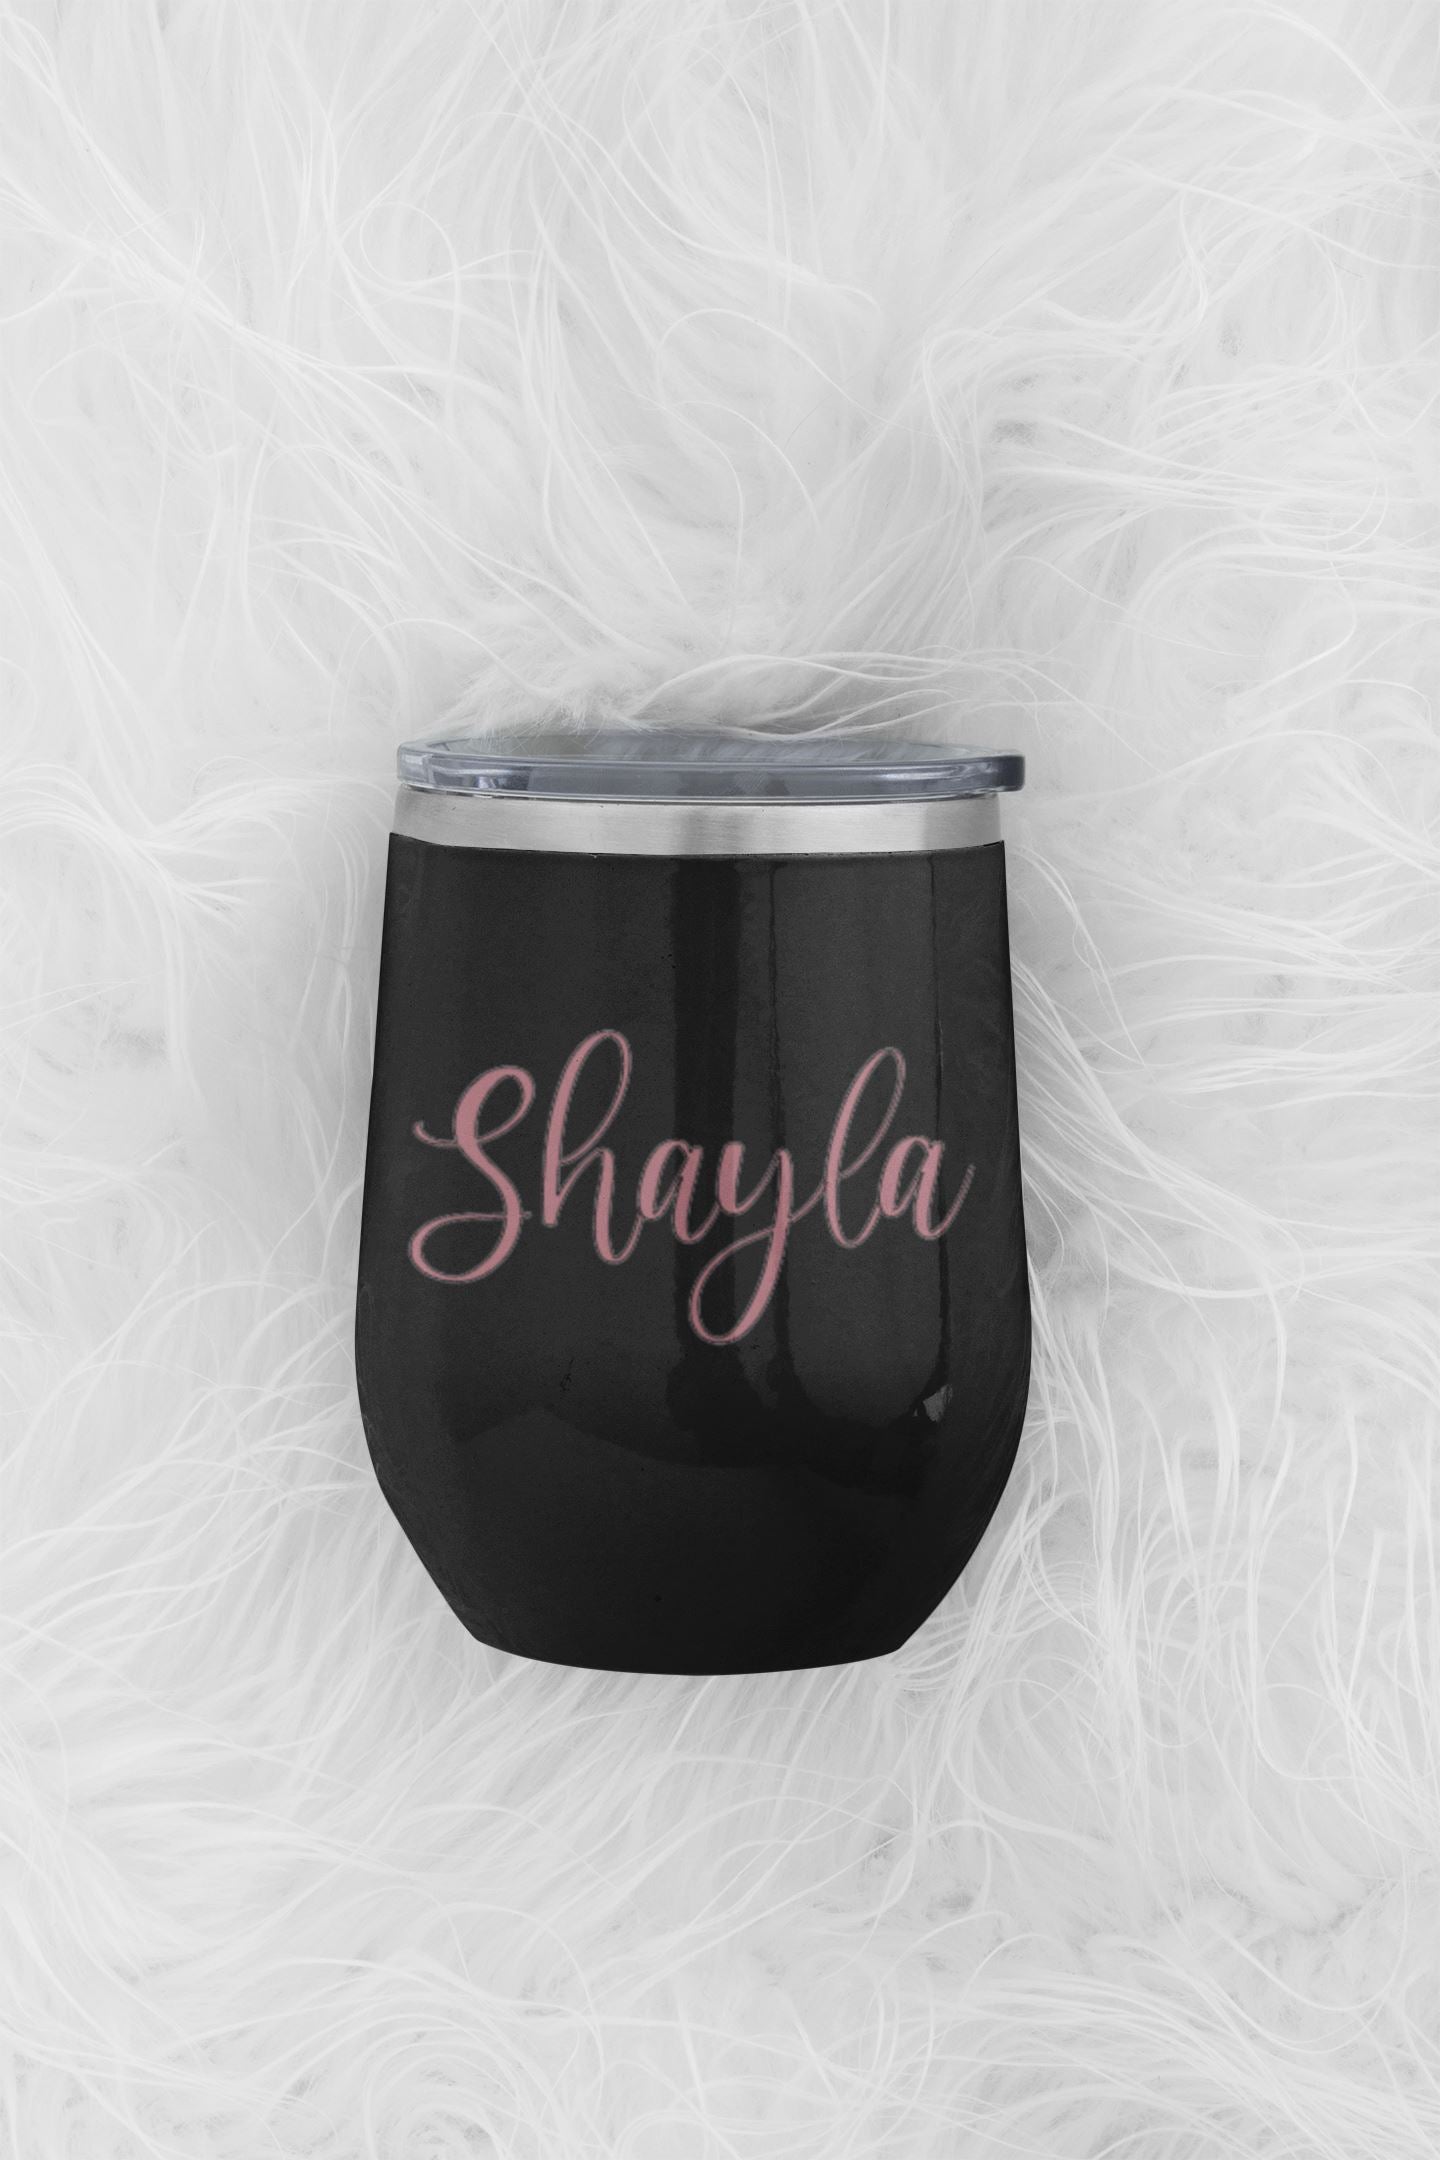 Personalized Wine Tumbler| Bridesmaid Glasses| Bridal Party Gift| Bridesmaid Proposal| Stainless Steel Stemless Glass B1ack By Design LLC 